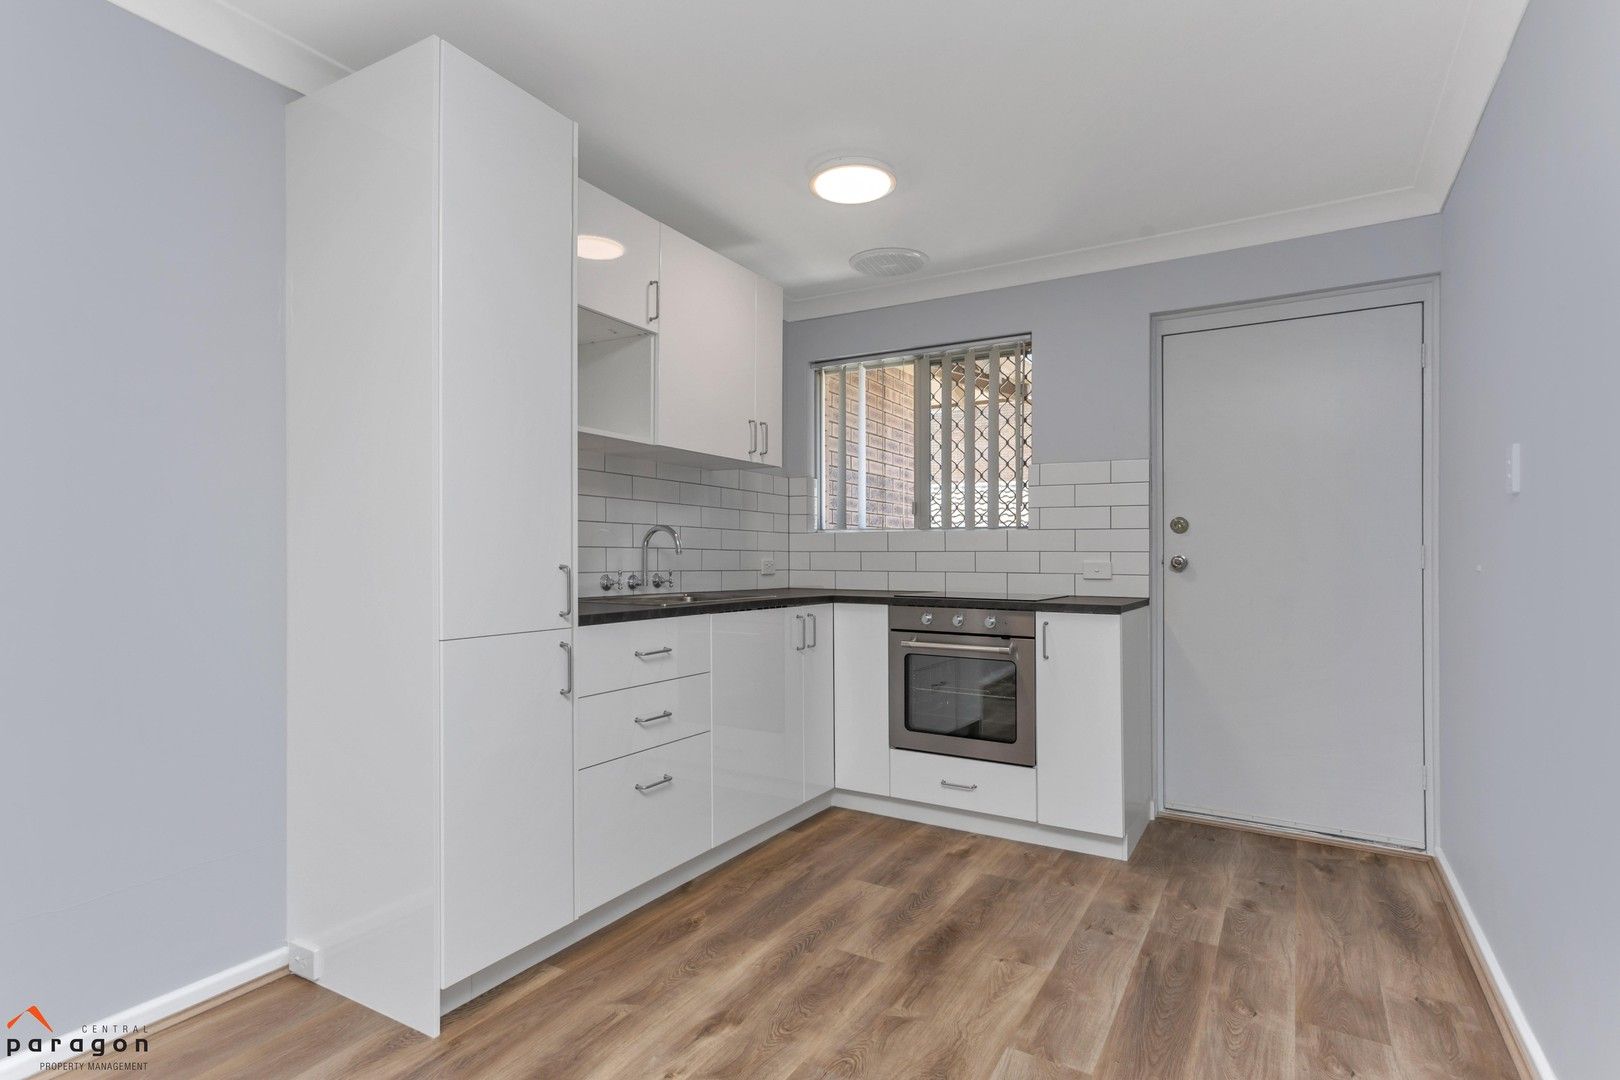 2 bedrooms Apartment / Unit / Flat in 11/21 Storthes Street MOUNT LAWLEY WA, 6050